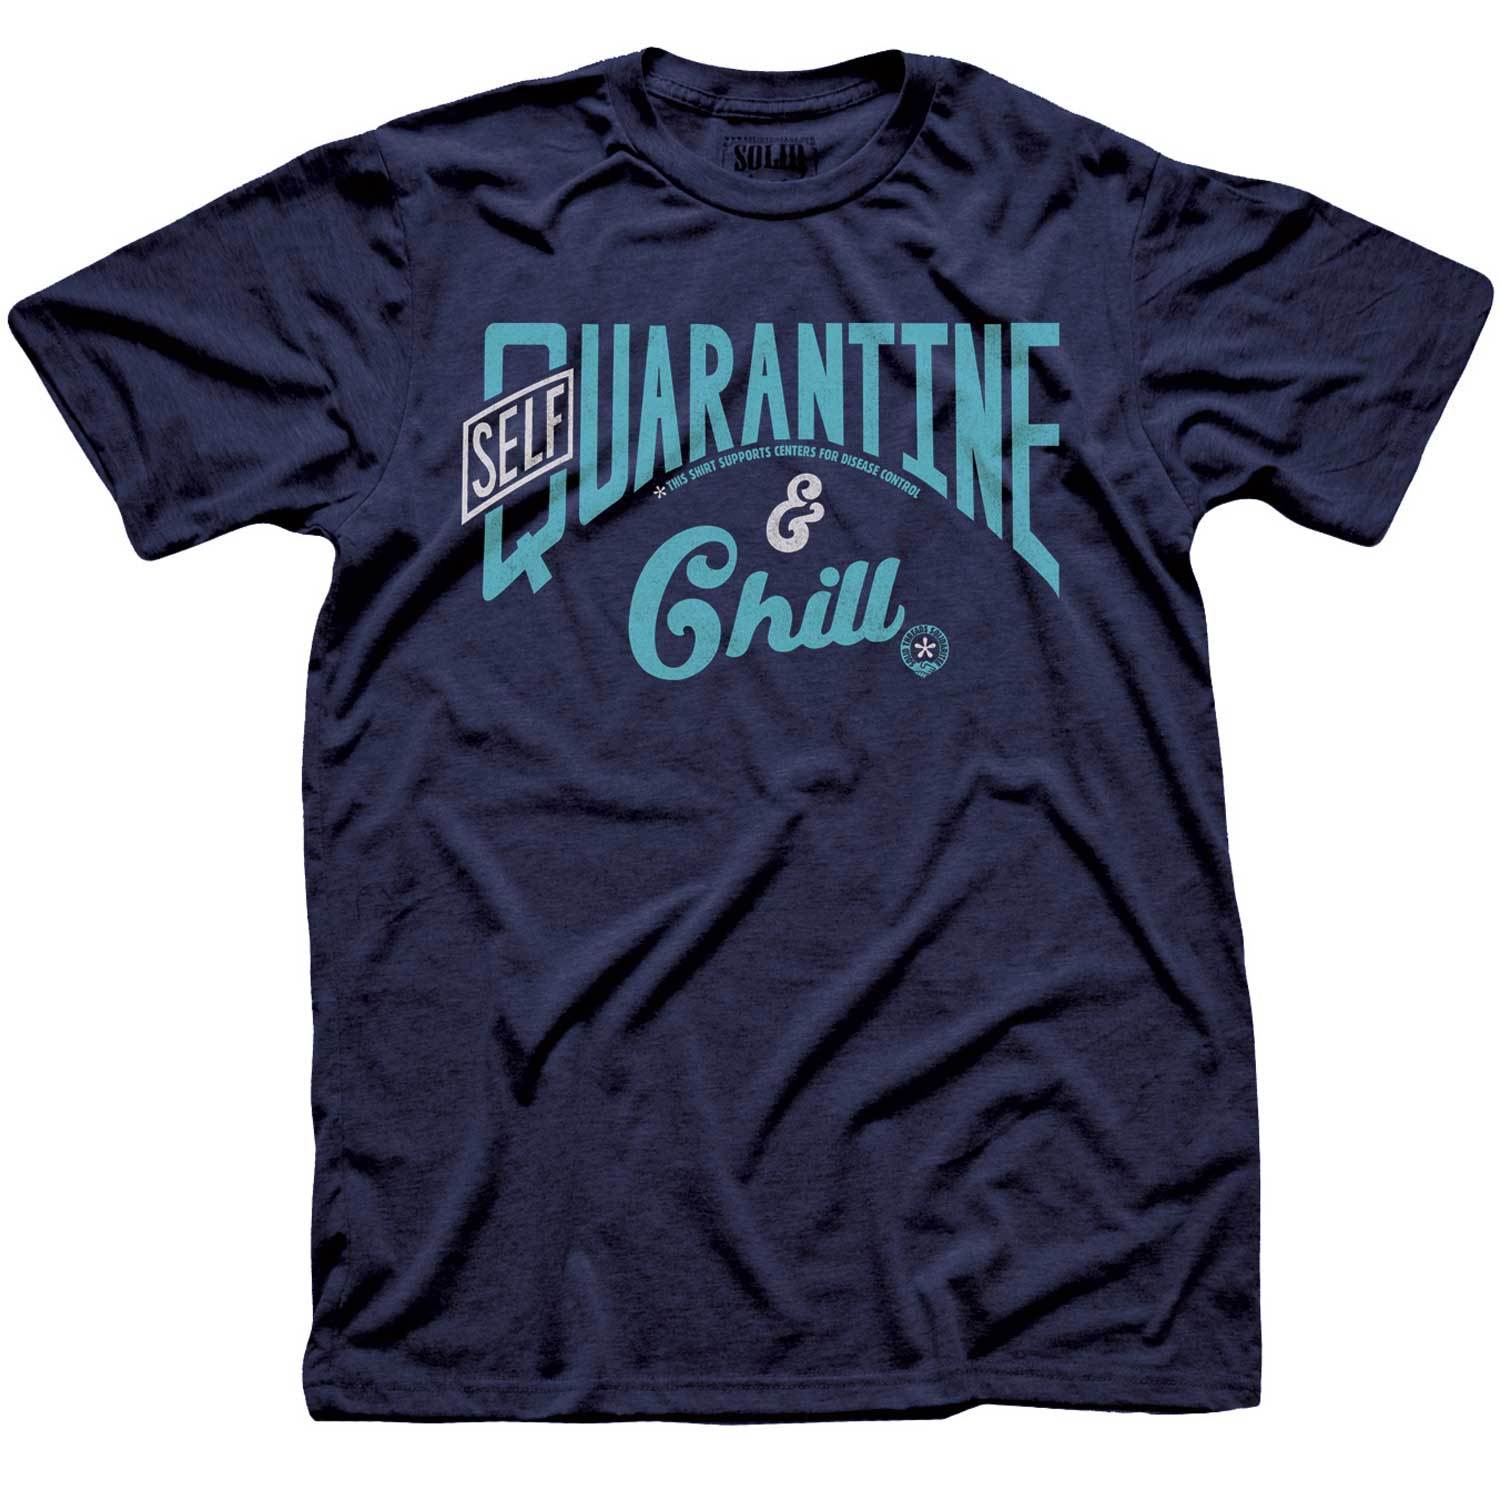 Self Quarantine & Chill Vintage Inspired Tee-shirt with Retro Coronavirus Relief Charity Graphic | Solid Threads